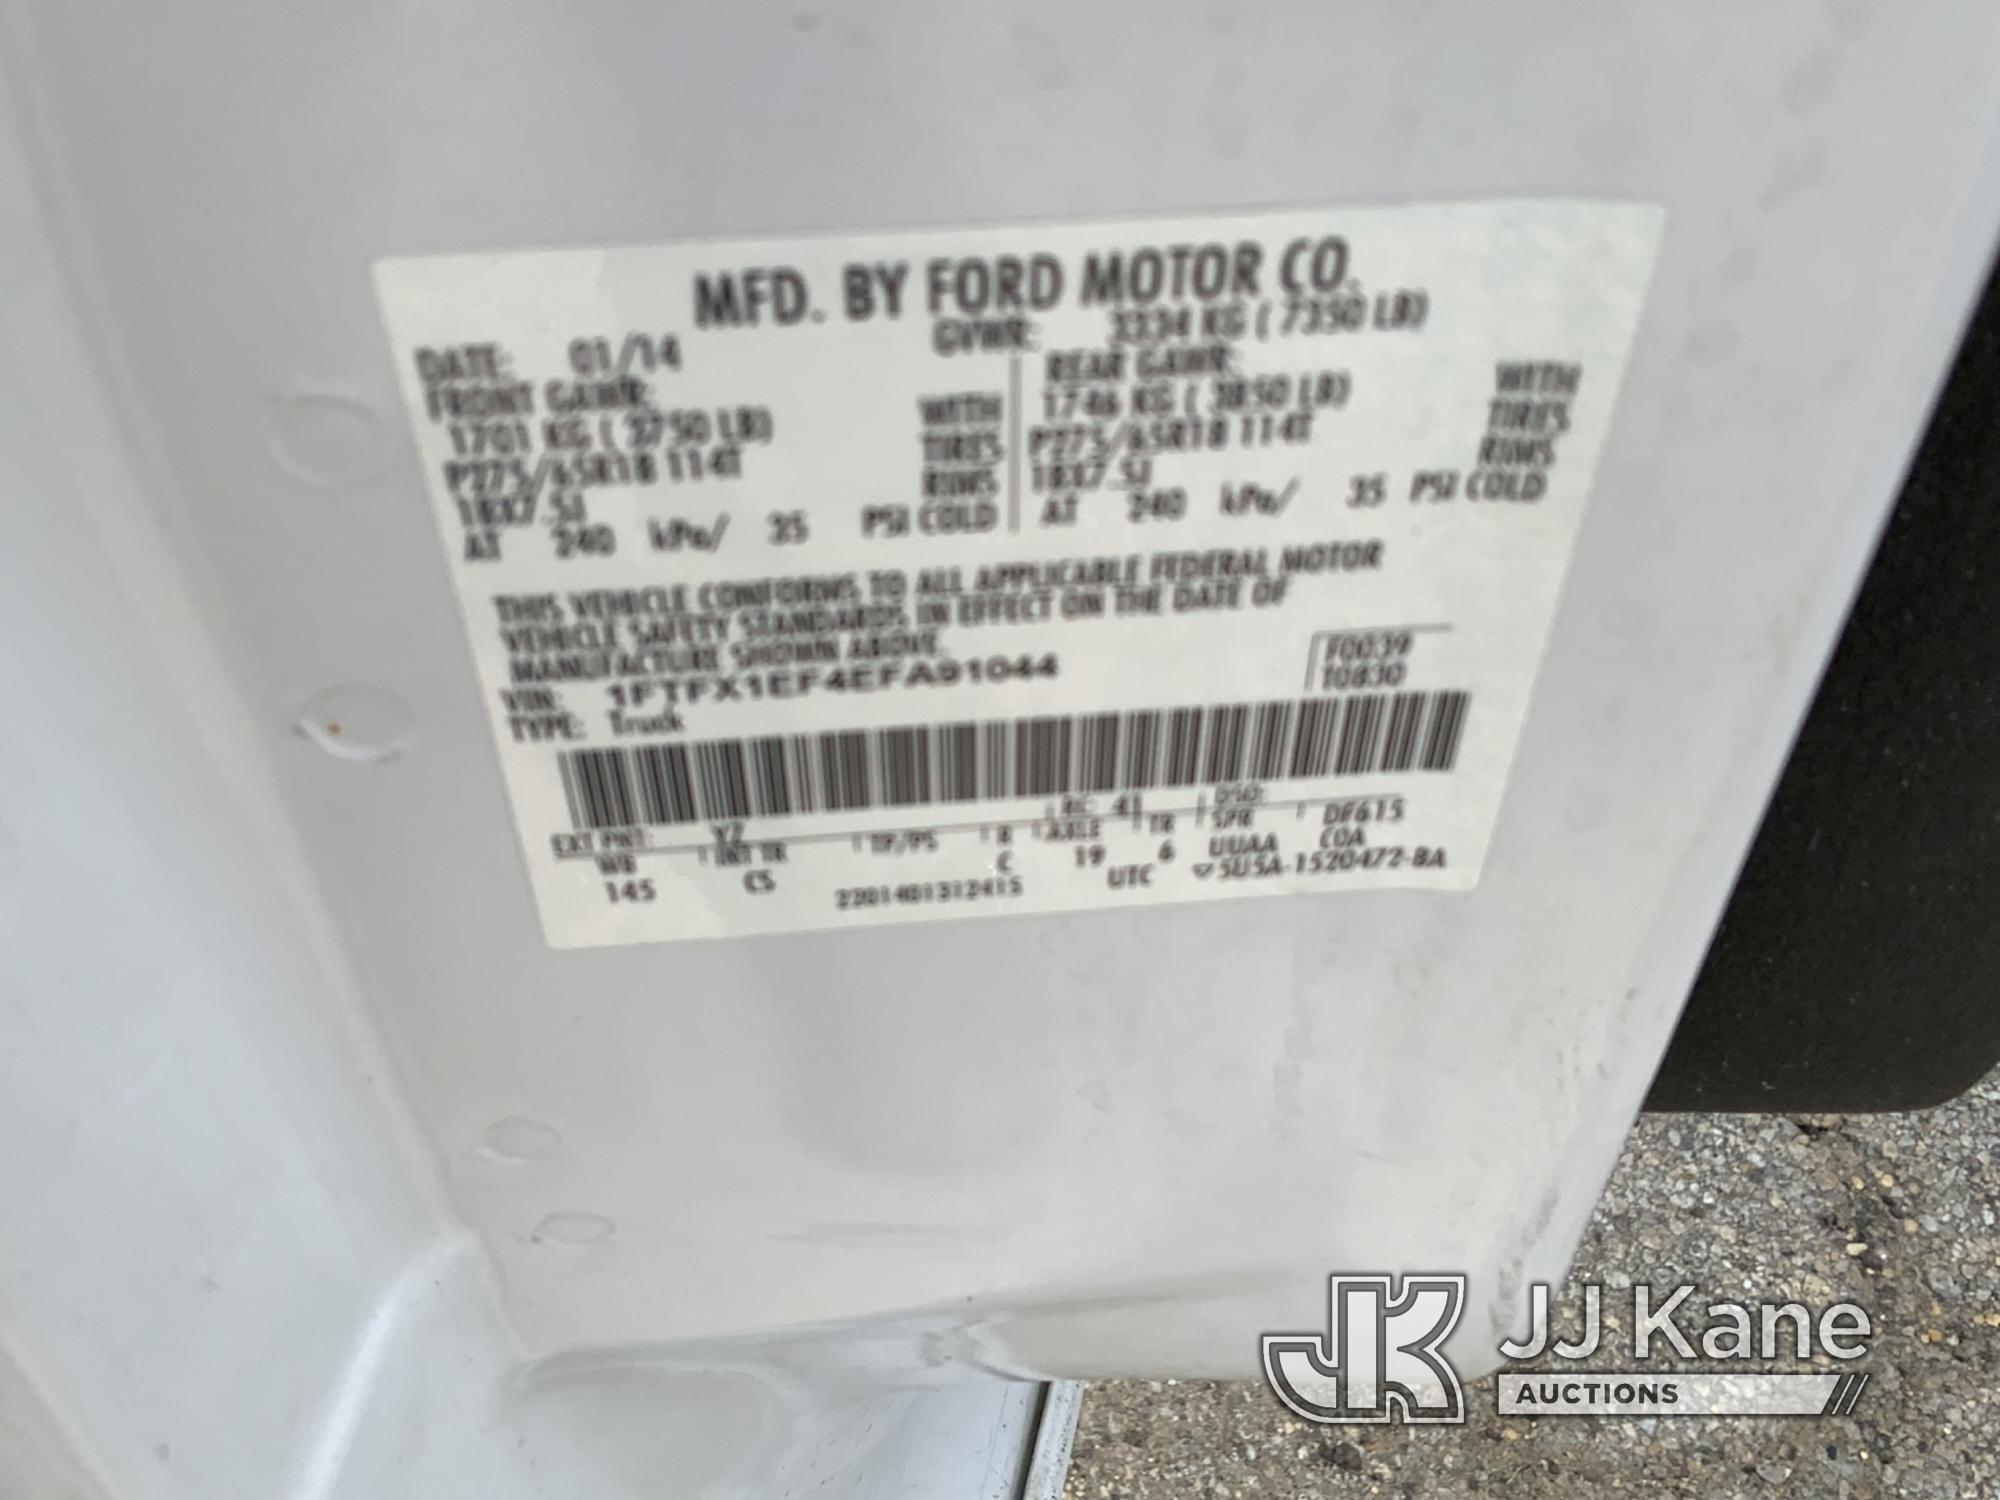 (South Beloit, IL) 2014 Ford F150 4x4 Extended-Cab Pickup Truck Runs, Moves, Rust Damage